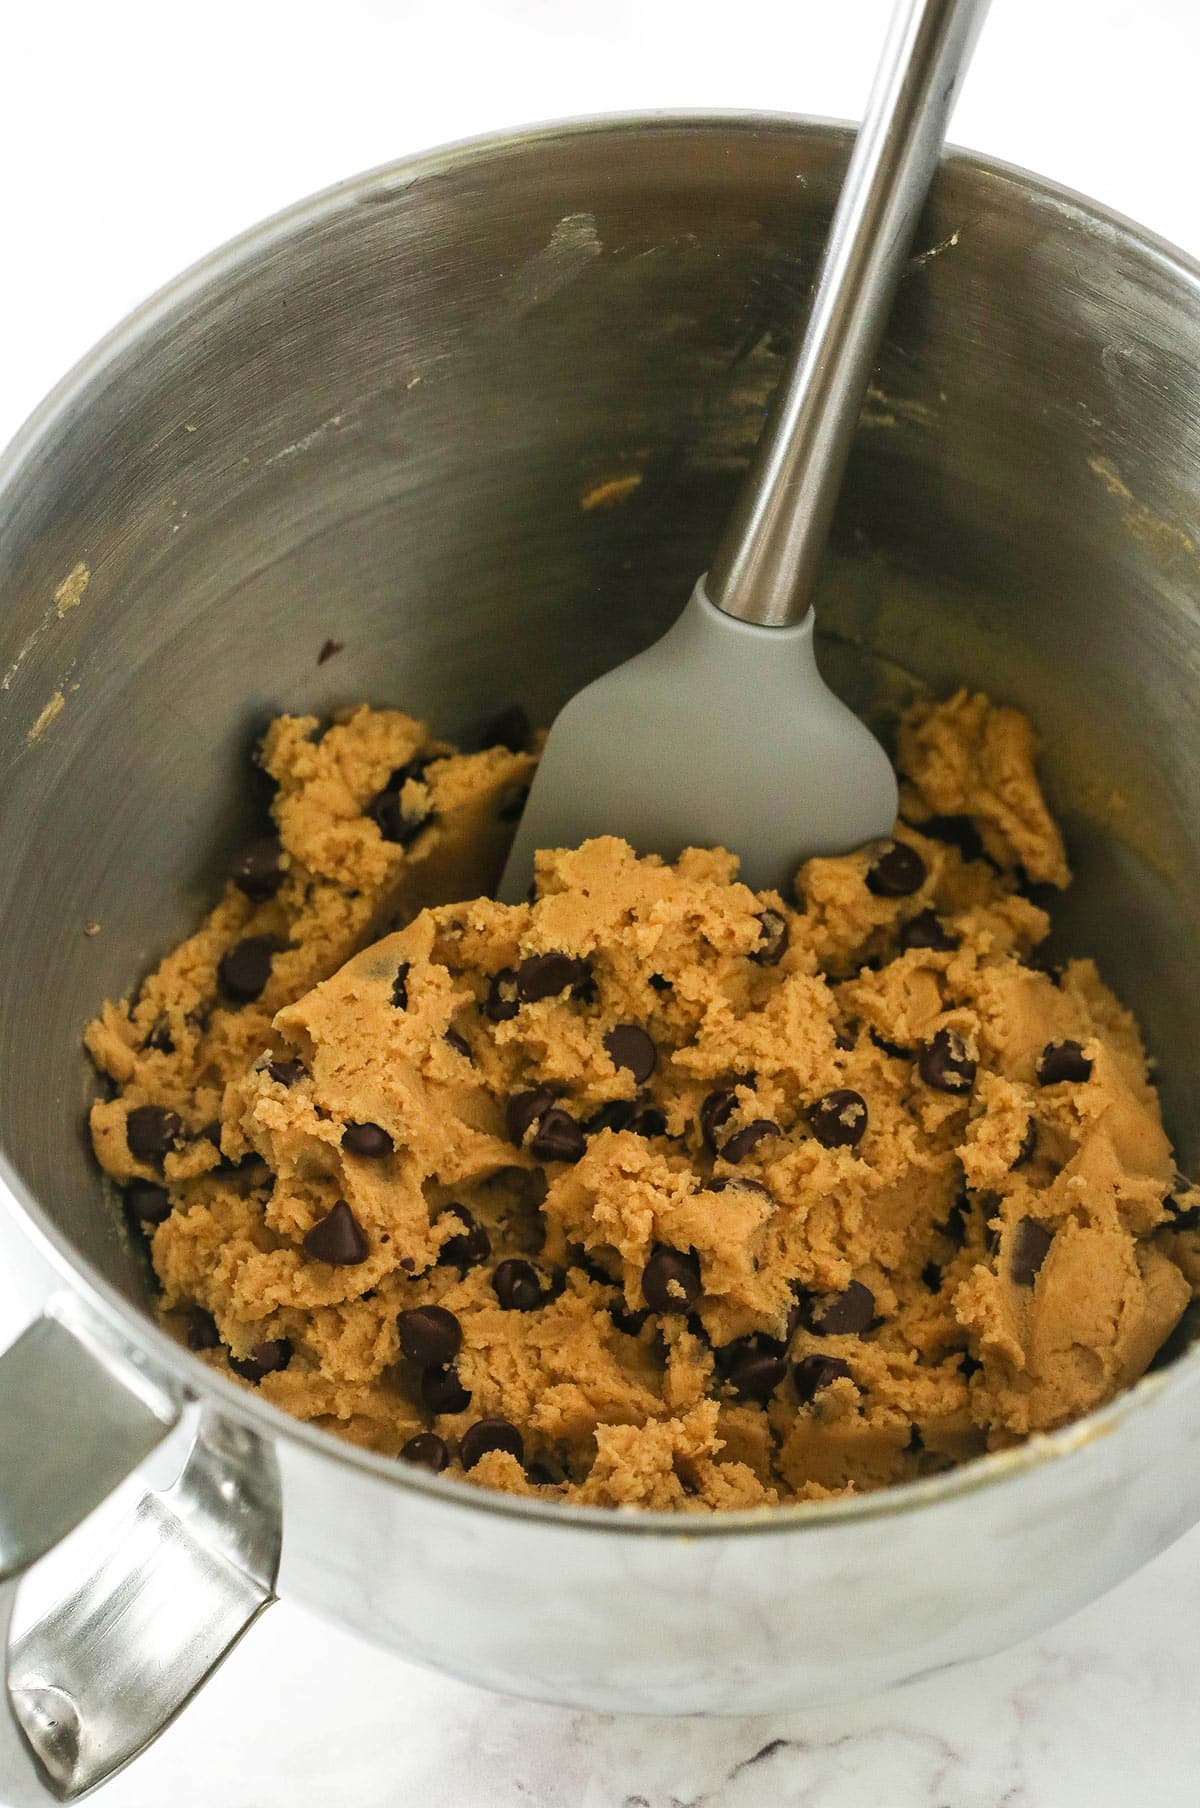 Mixing in chocolate chips to the peanut butter cookie dough